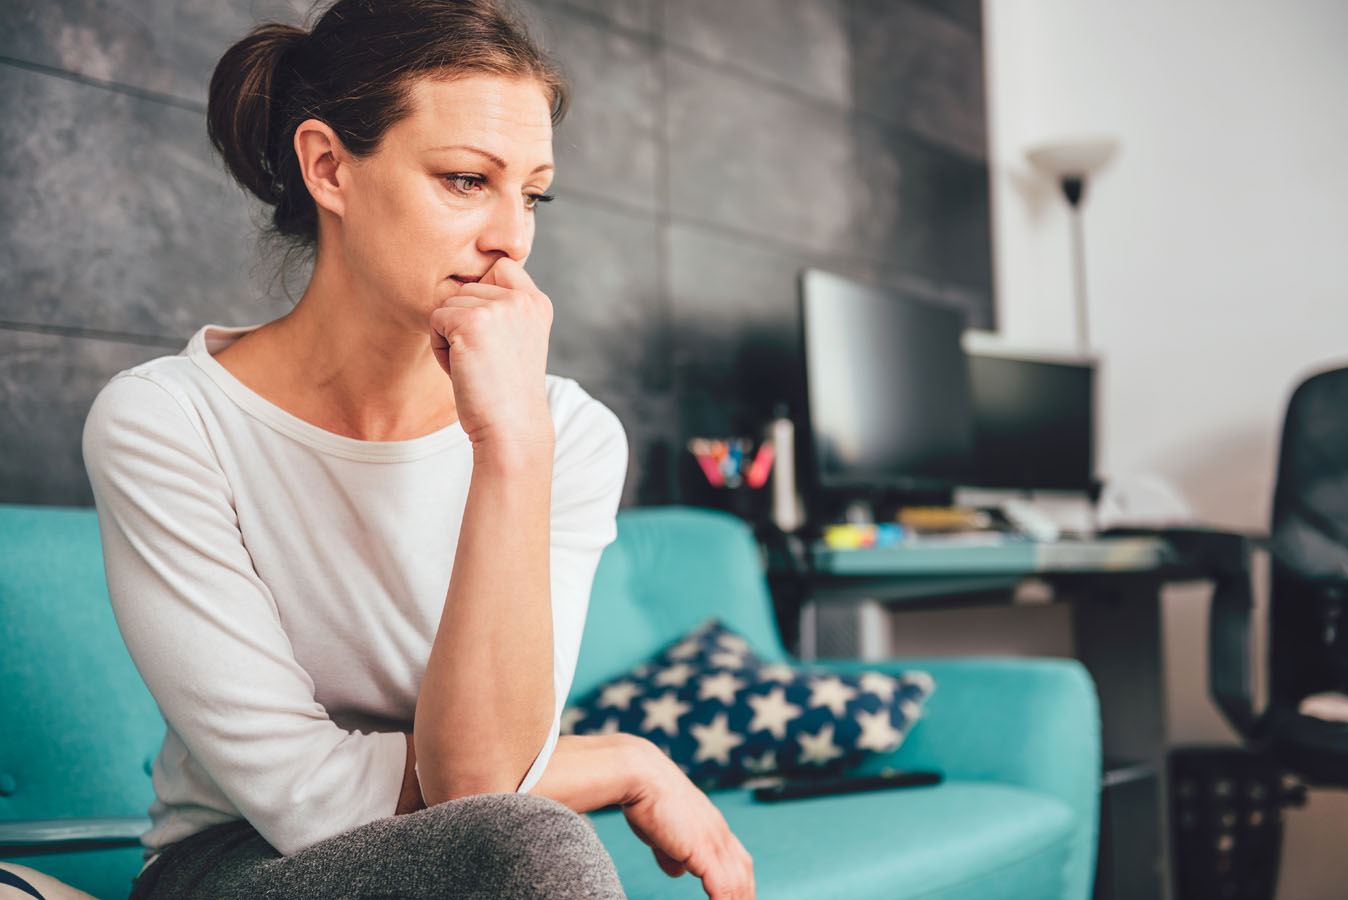 Woman sitting on the couch with her head on her hand looking sad, distraught, depressed and anxious about her life | Therapy for Women | Women's therapy in Baltimore | Help for women's issues | New Connections Counseling Center | Baltimore, MD 21210" width="300" height="200